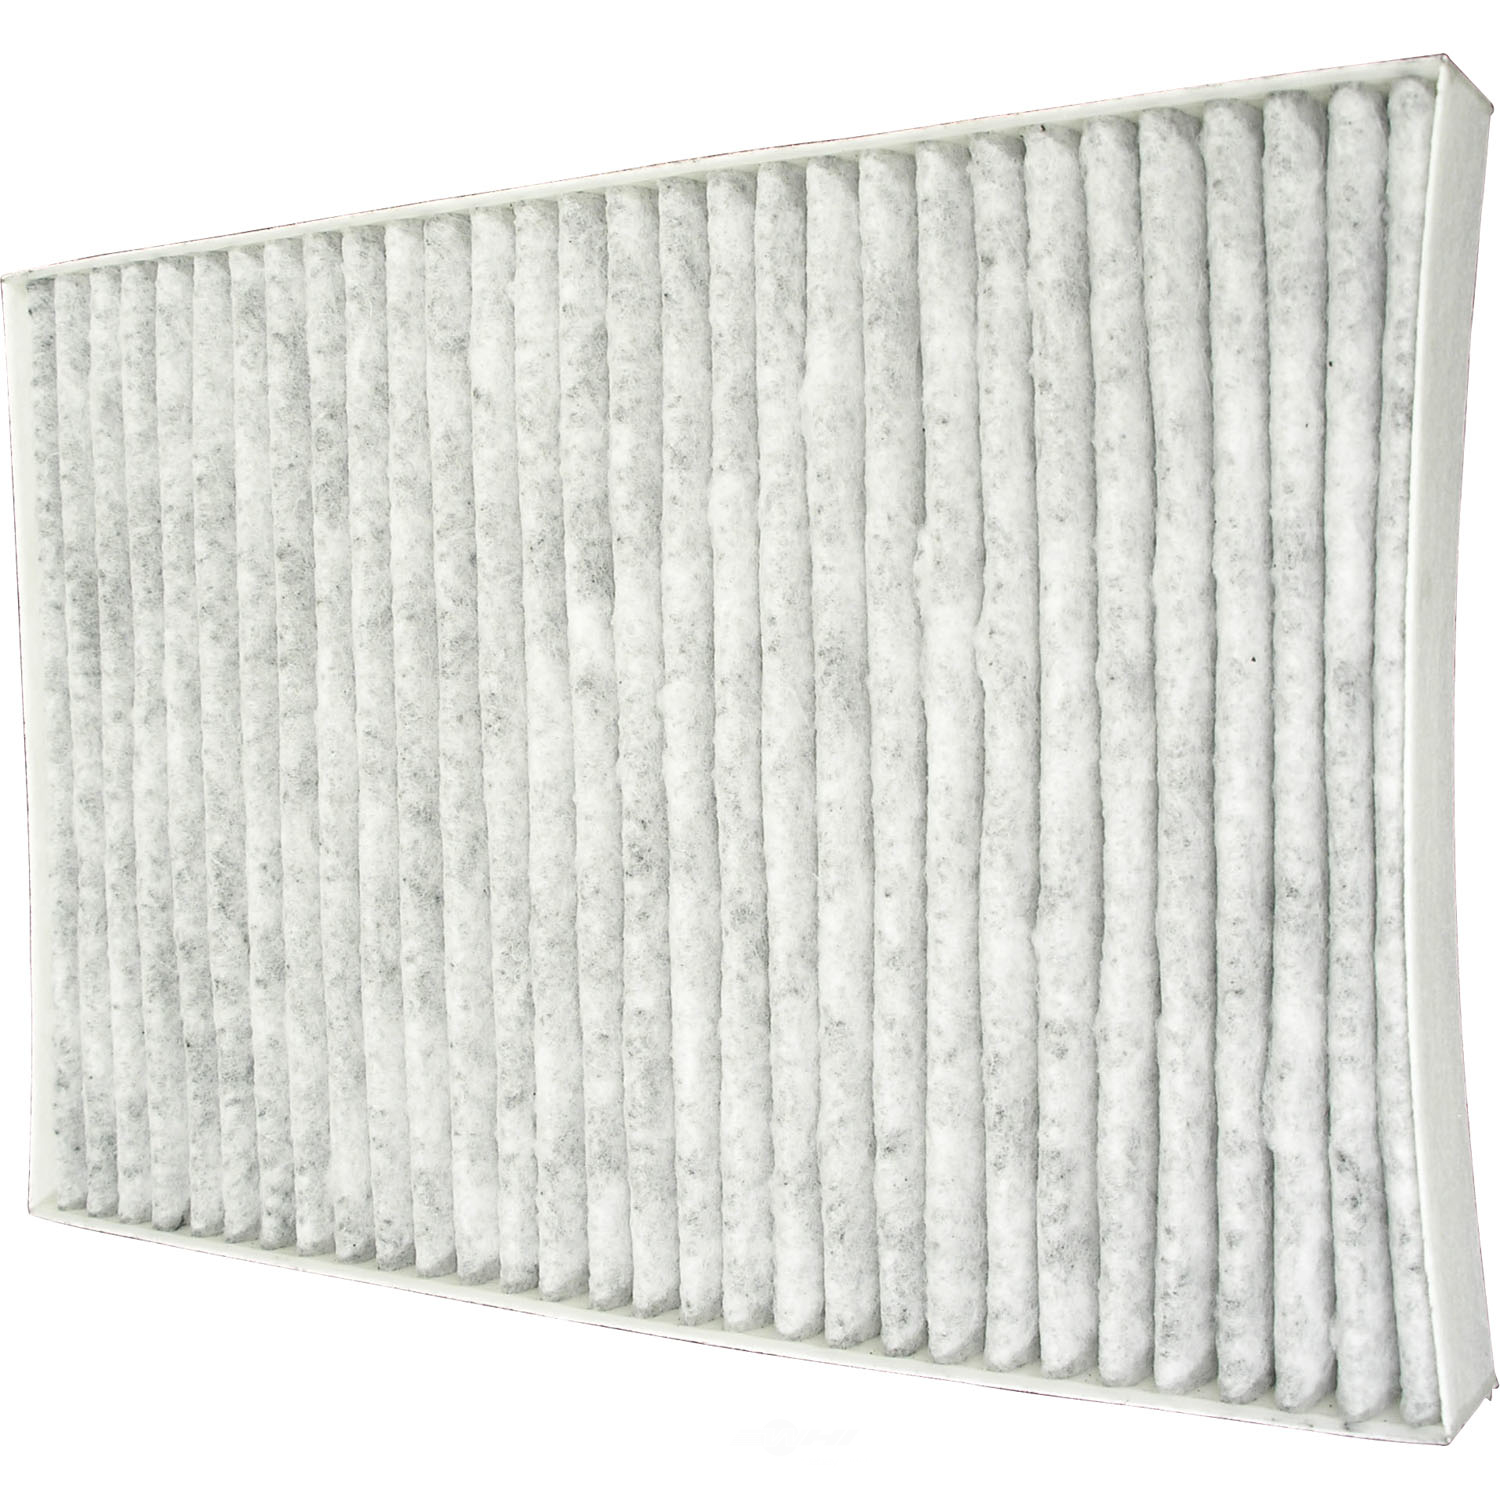 UNIVERSAL AIR CONDITIONER, INC. - Charcoal Cabin Air Filter - UAC FI 1053C